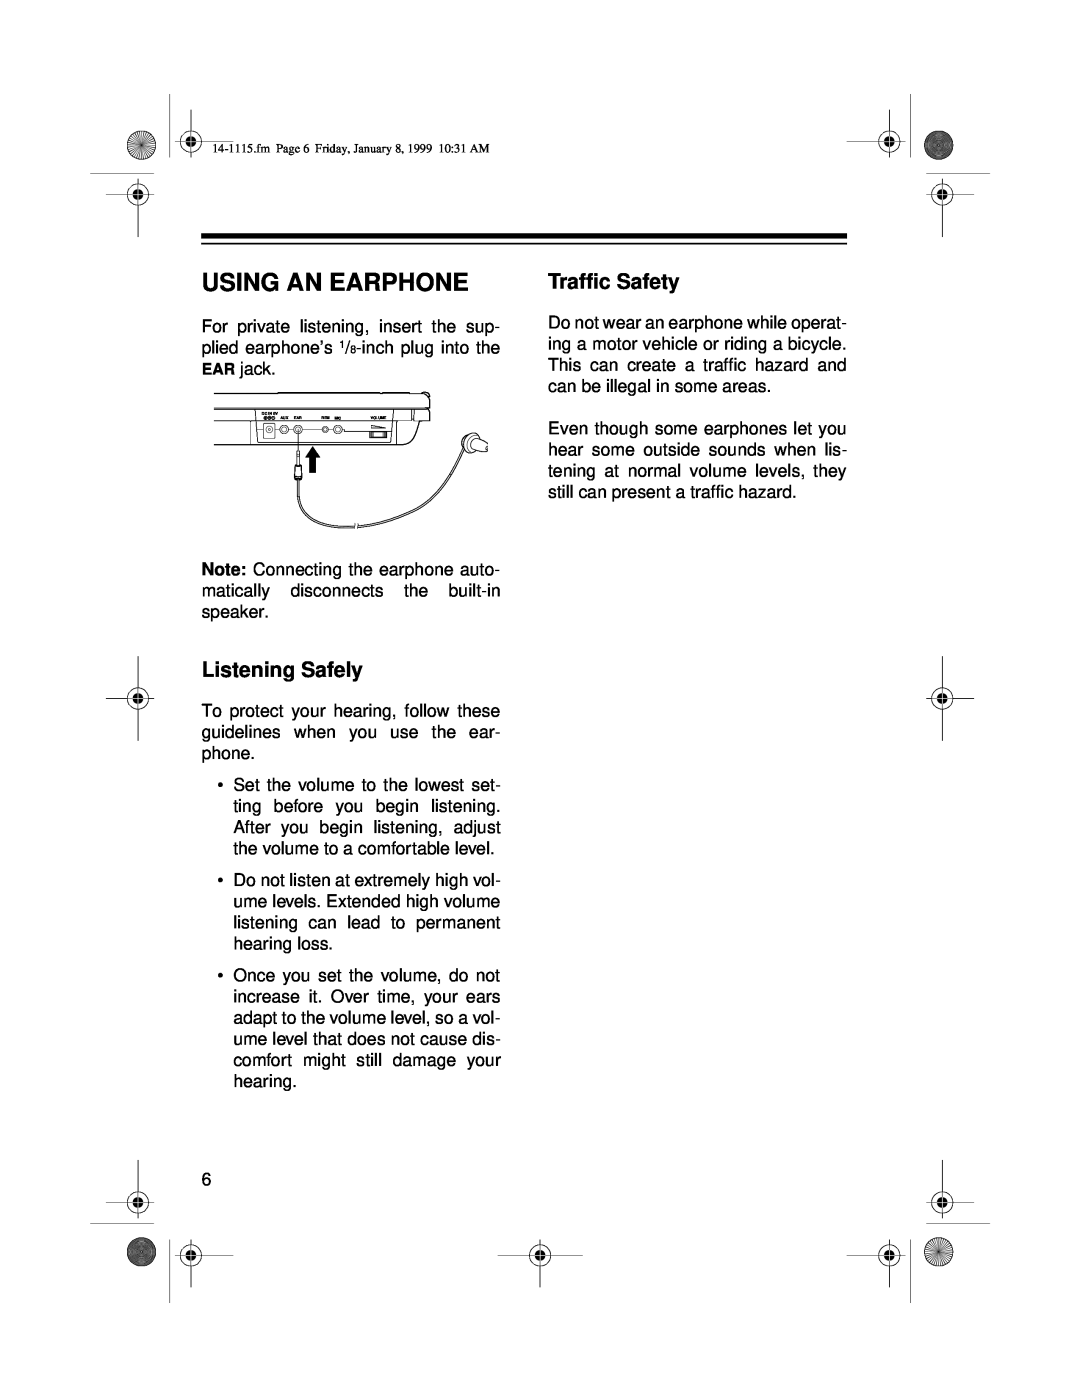 Optimus CTR-108 owner manual Using An Earphone, Listening Safely, Traffic Safety 